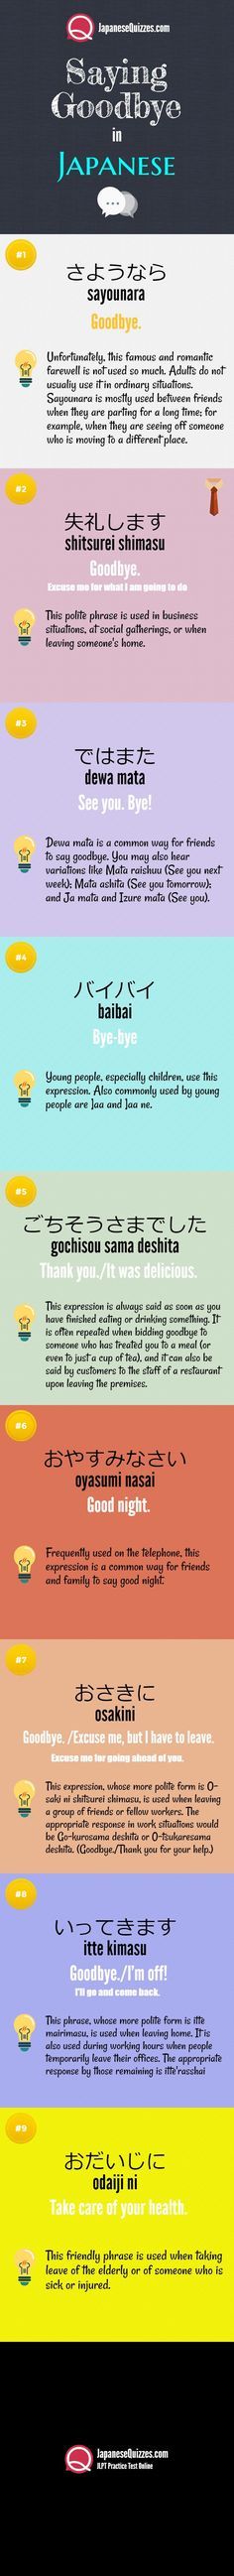 10 Ways to Say God Bye in Japanese 1